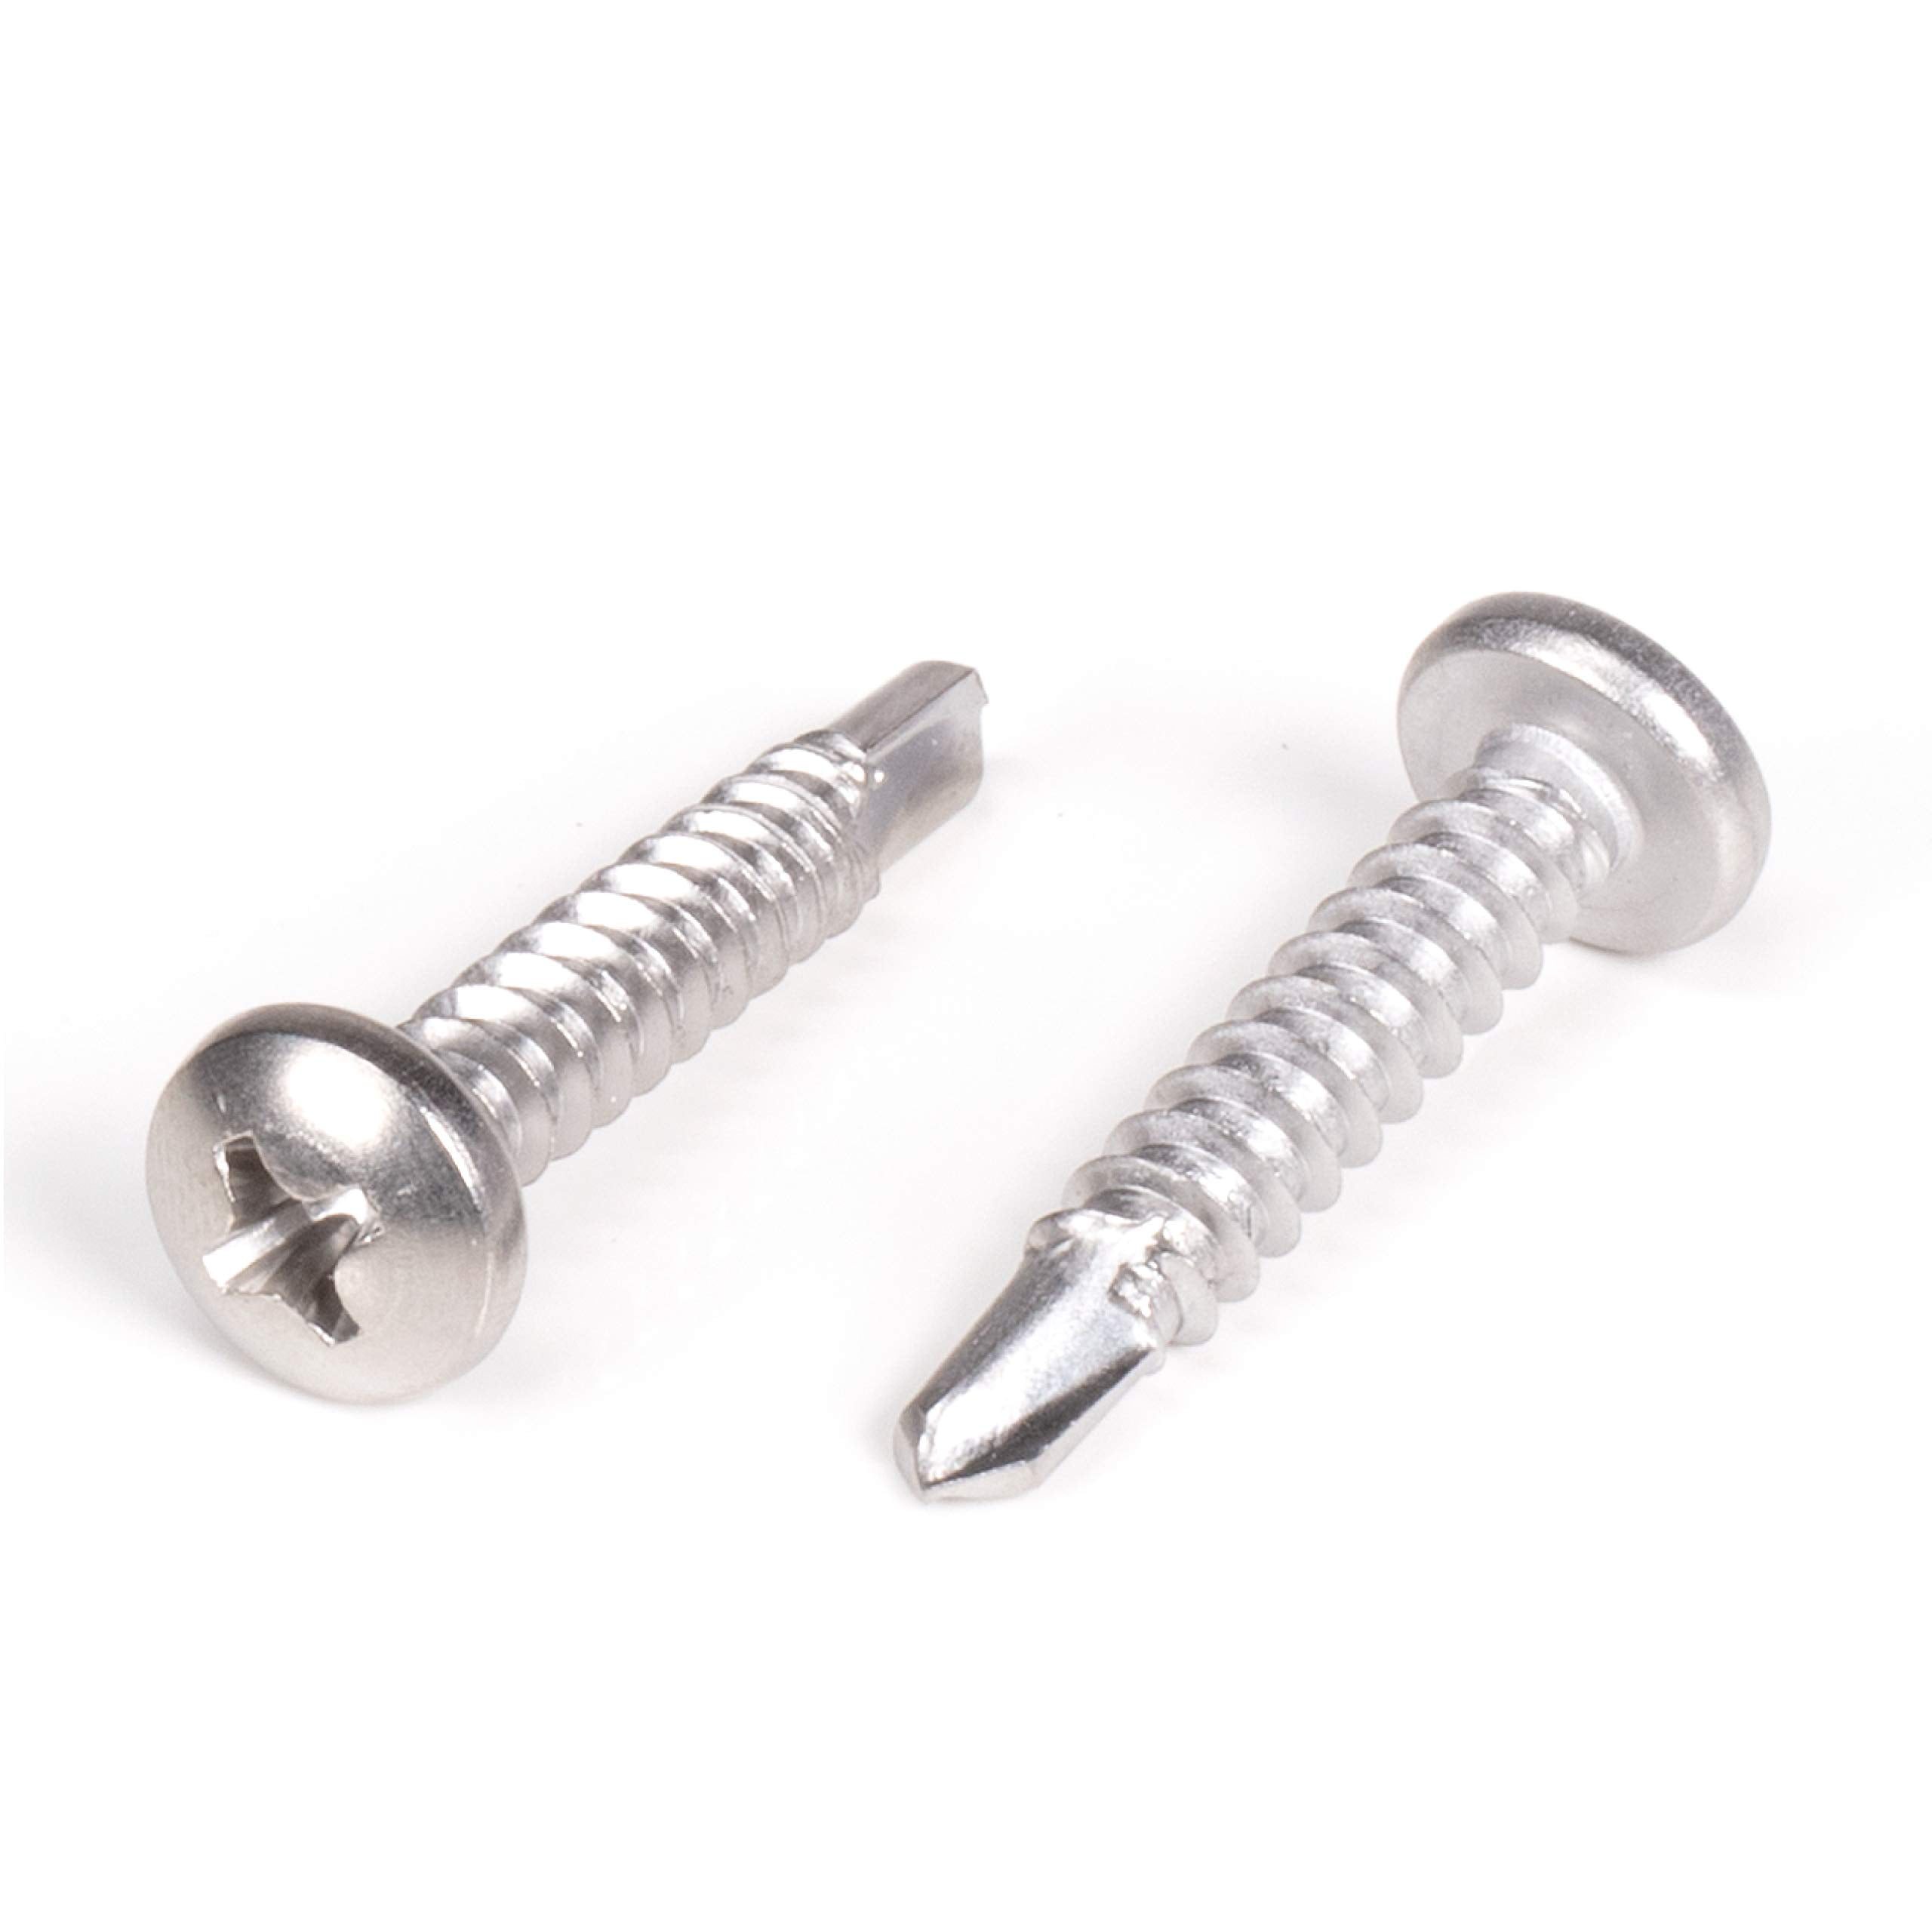 THE CIMPLE CO - 100pc Stainless Steel Self Drilling Tapping Screws #10 Stainless Steel Pan Head Self Drilling Screws